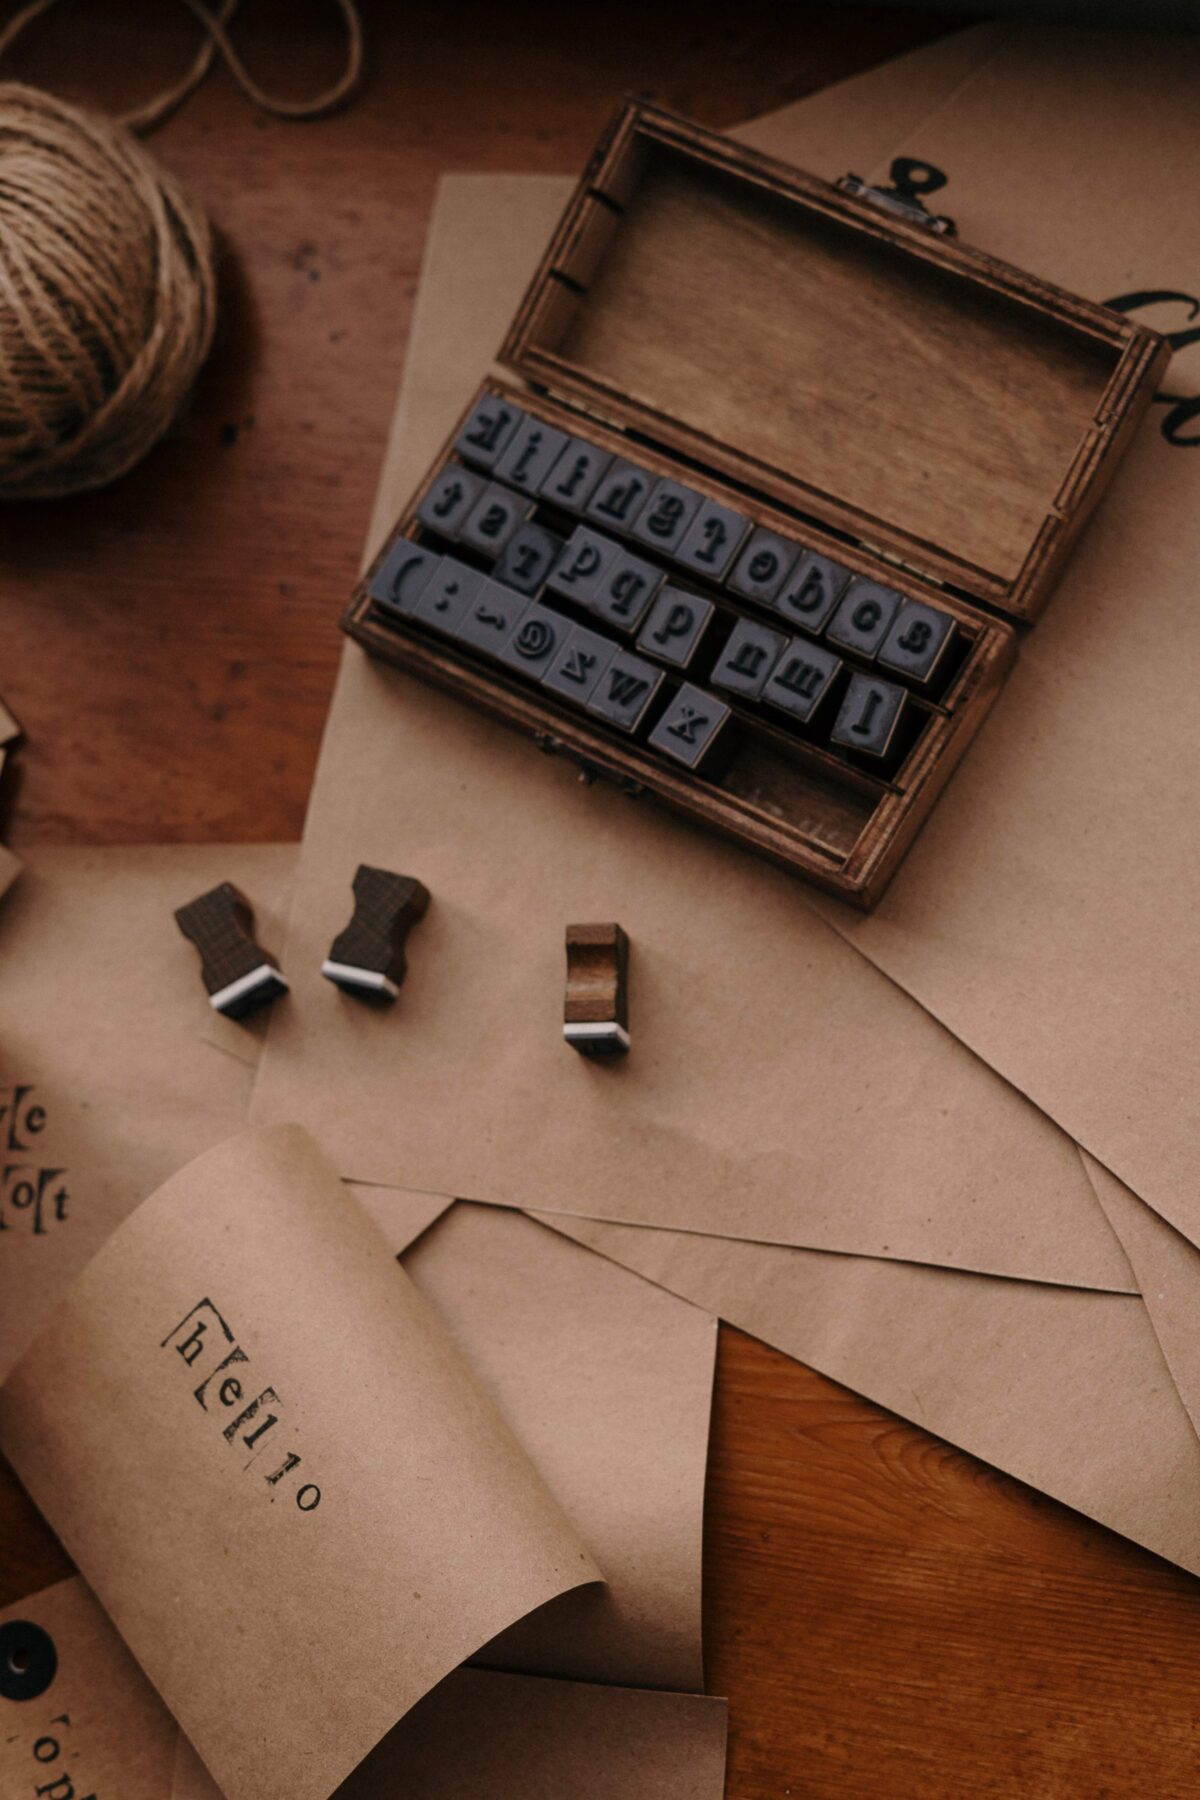 stationery and some letter stamps in a wooden box